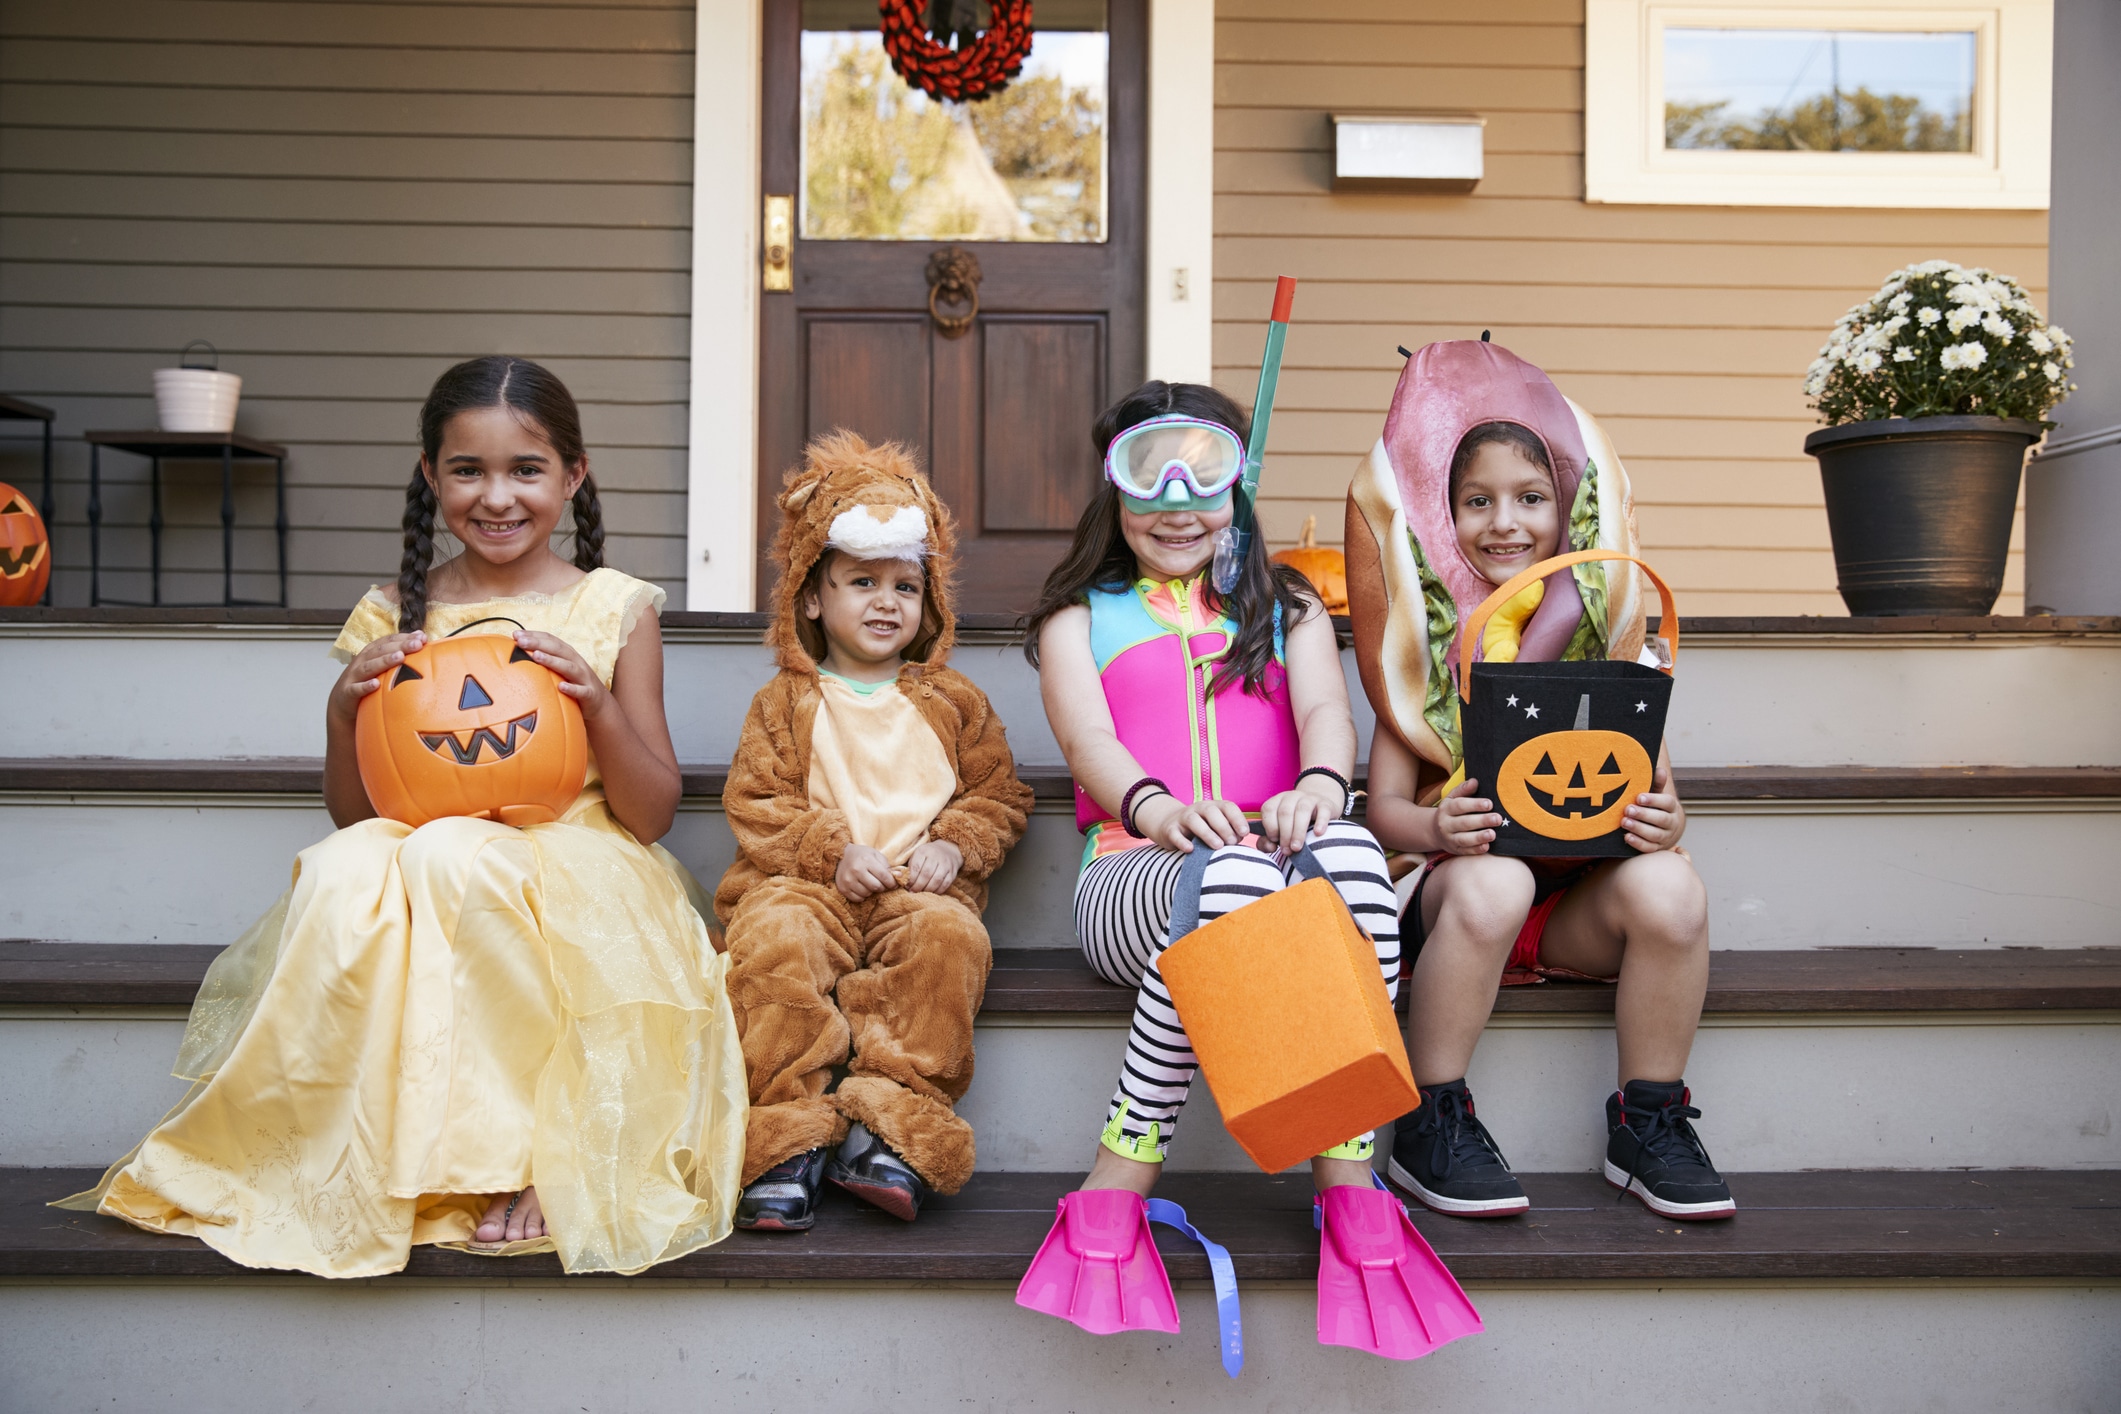 Children in costumes sitting down together with their candy buckets